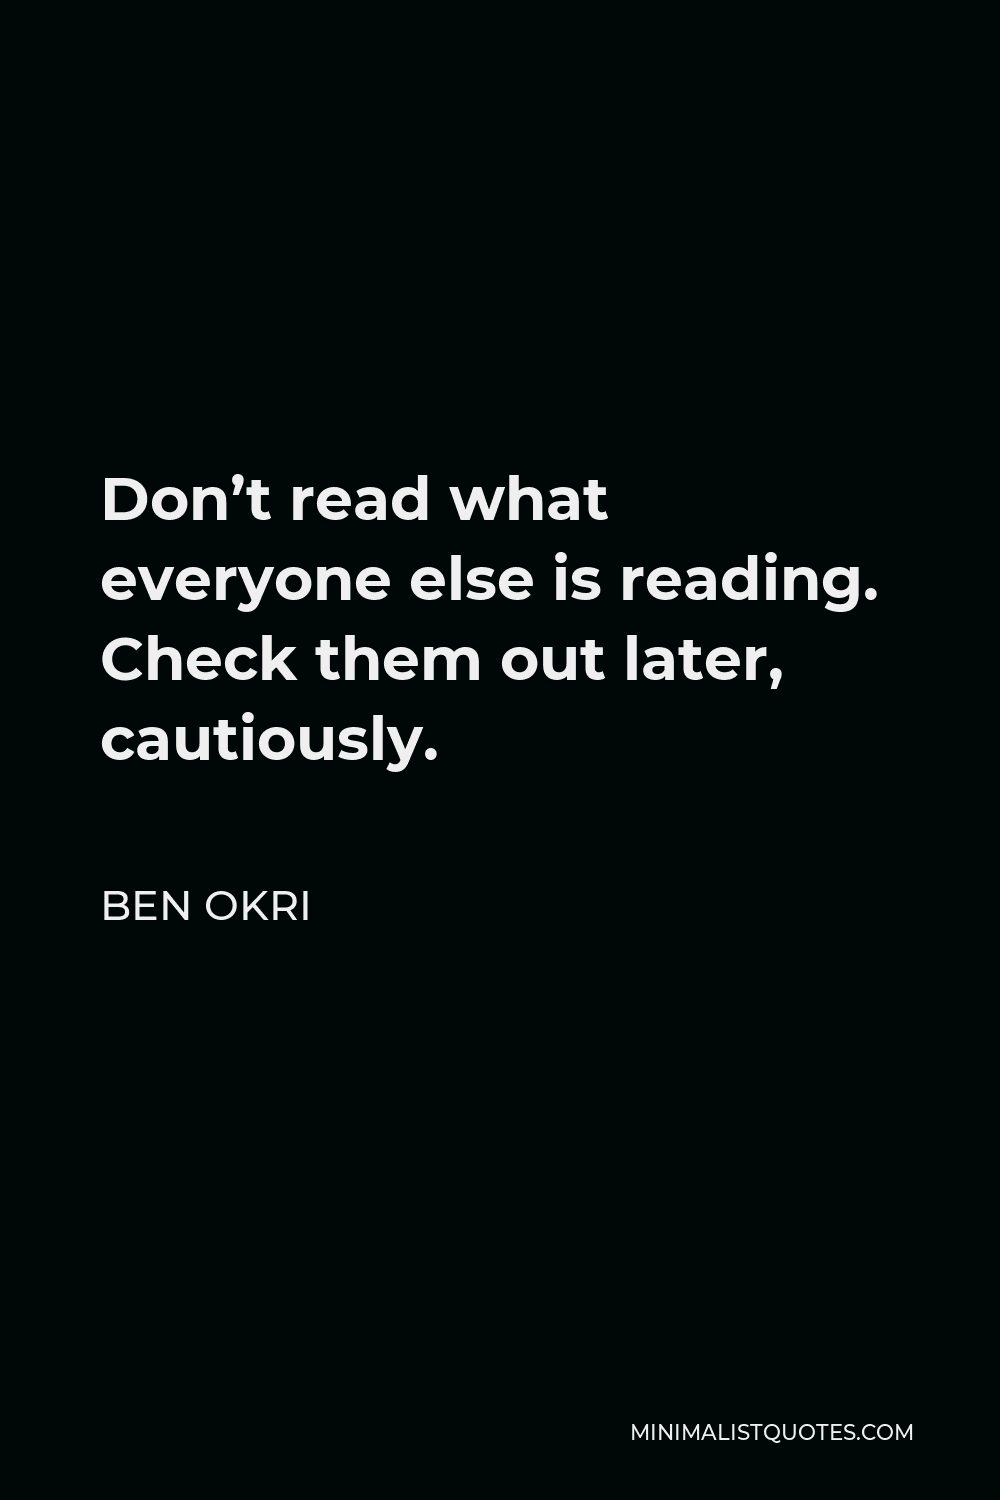 Ben Okri Quote - Don’t read what everyone else is reading. Check them out later, cautiously.